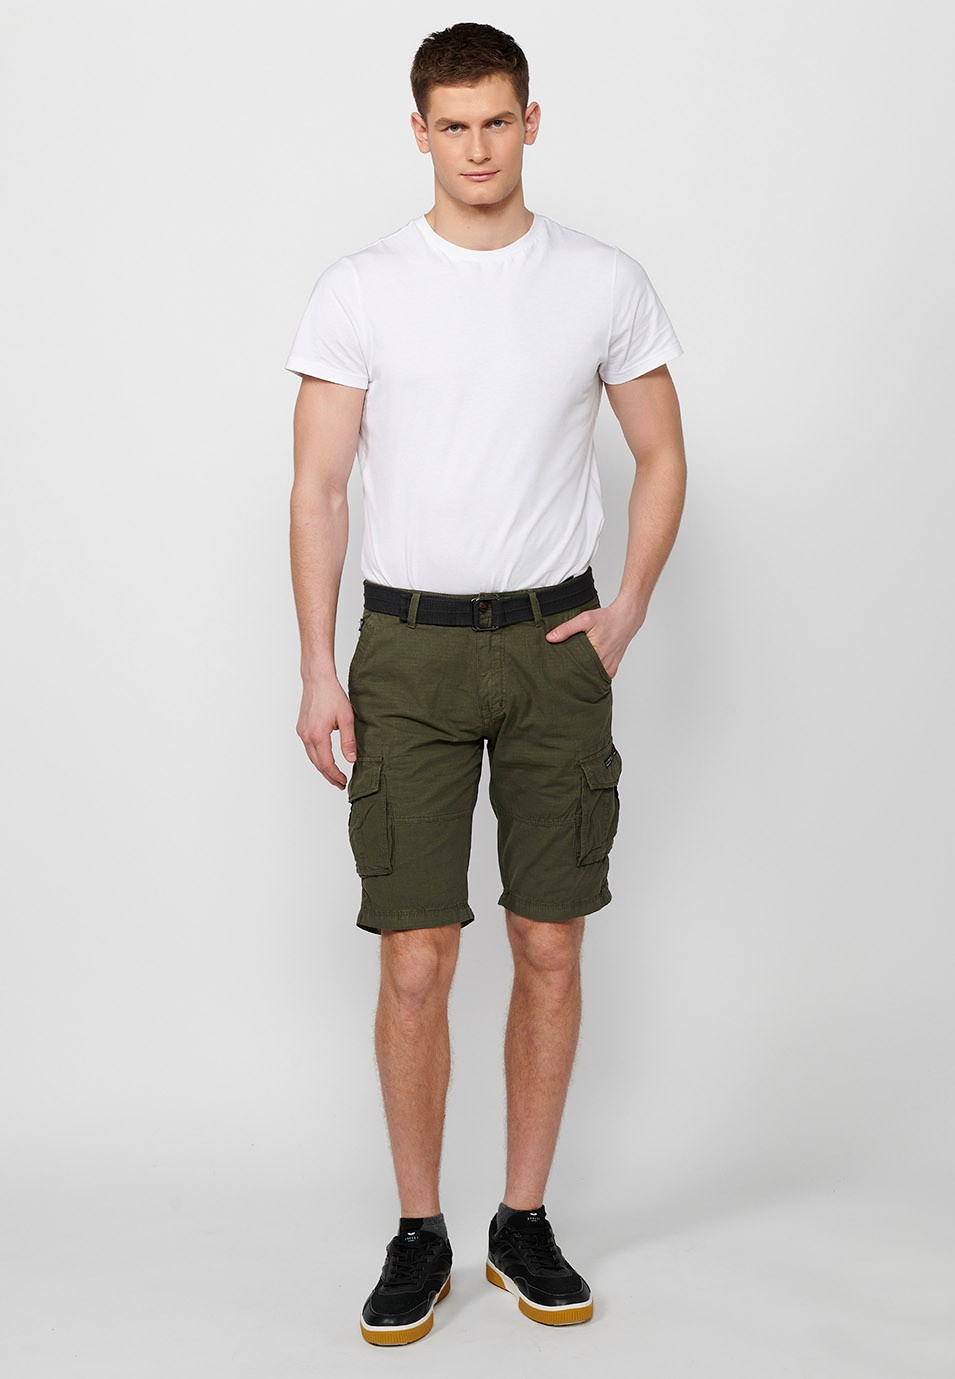 Cotton cargo shorts with belt and front closure with zipper and button with pockets, two back pockets with flap and two green cargo pants for Men